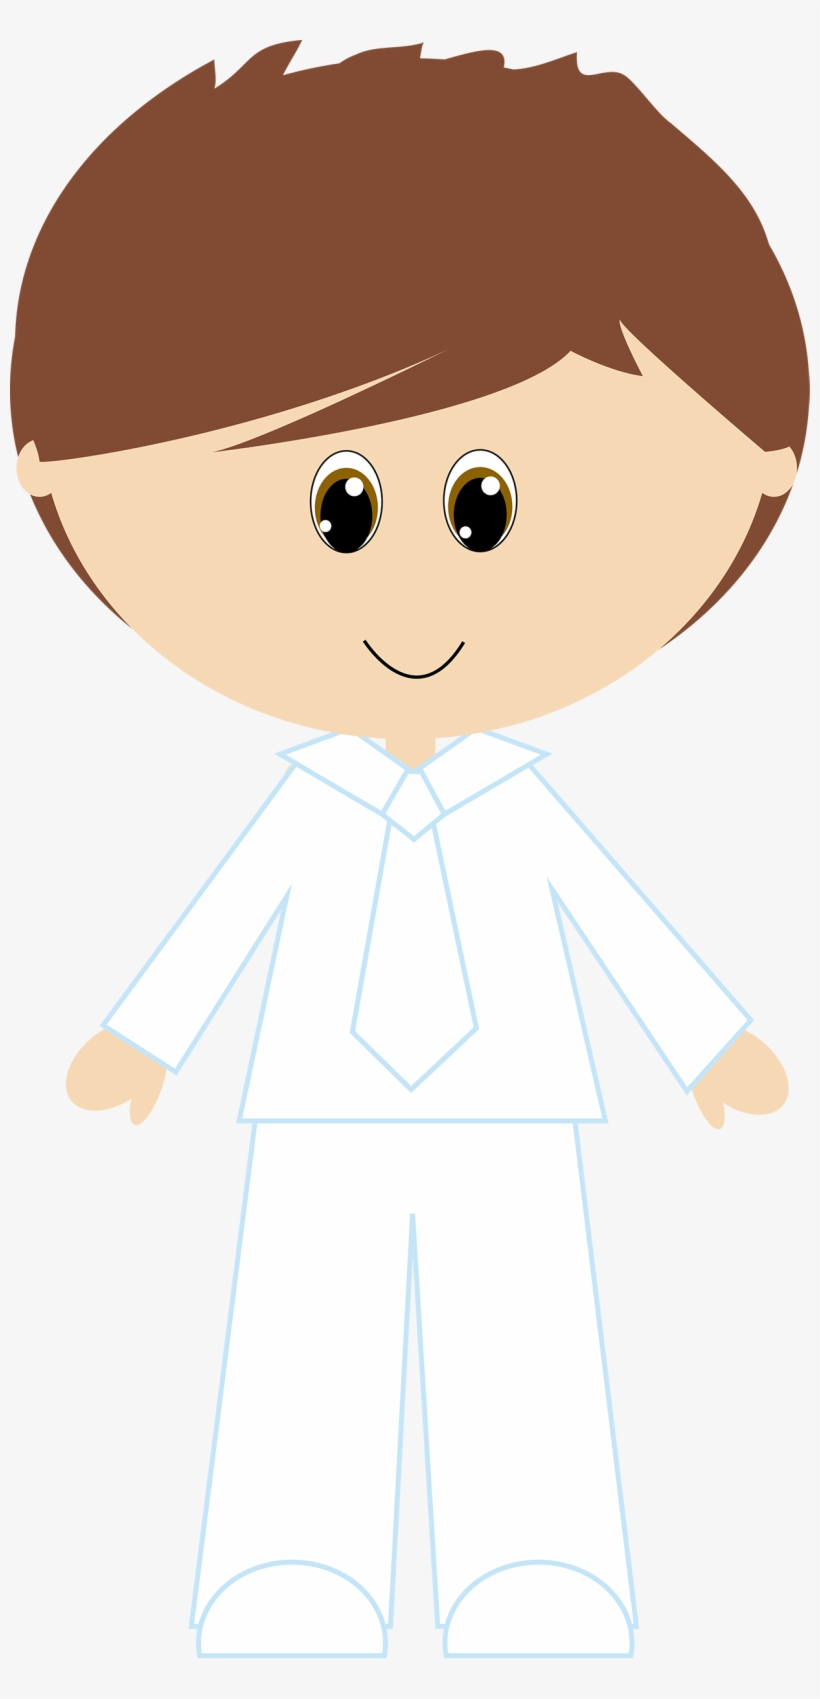 First Communion Minus - First Communion Boy Png, transparent png #5177415